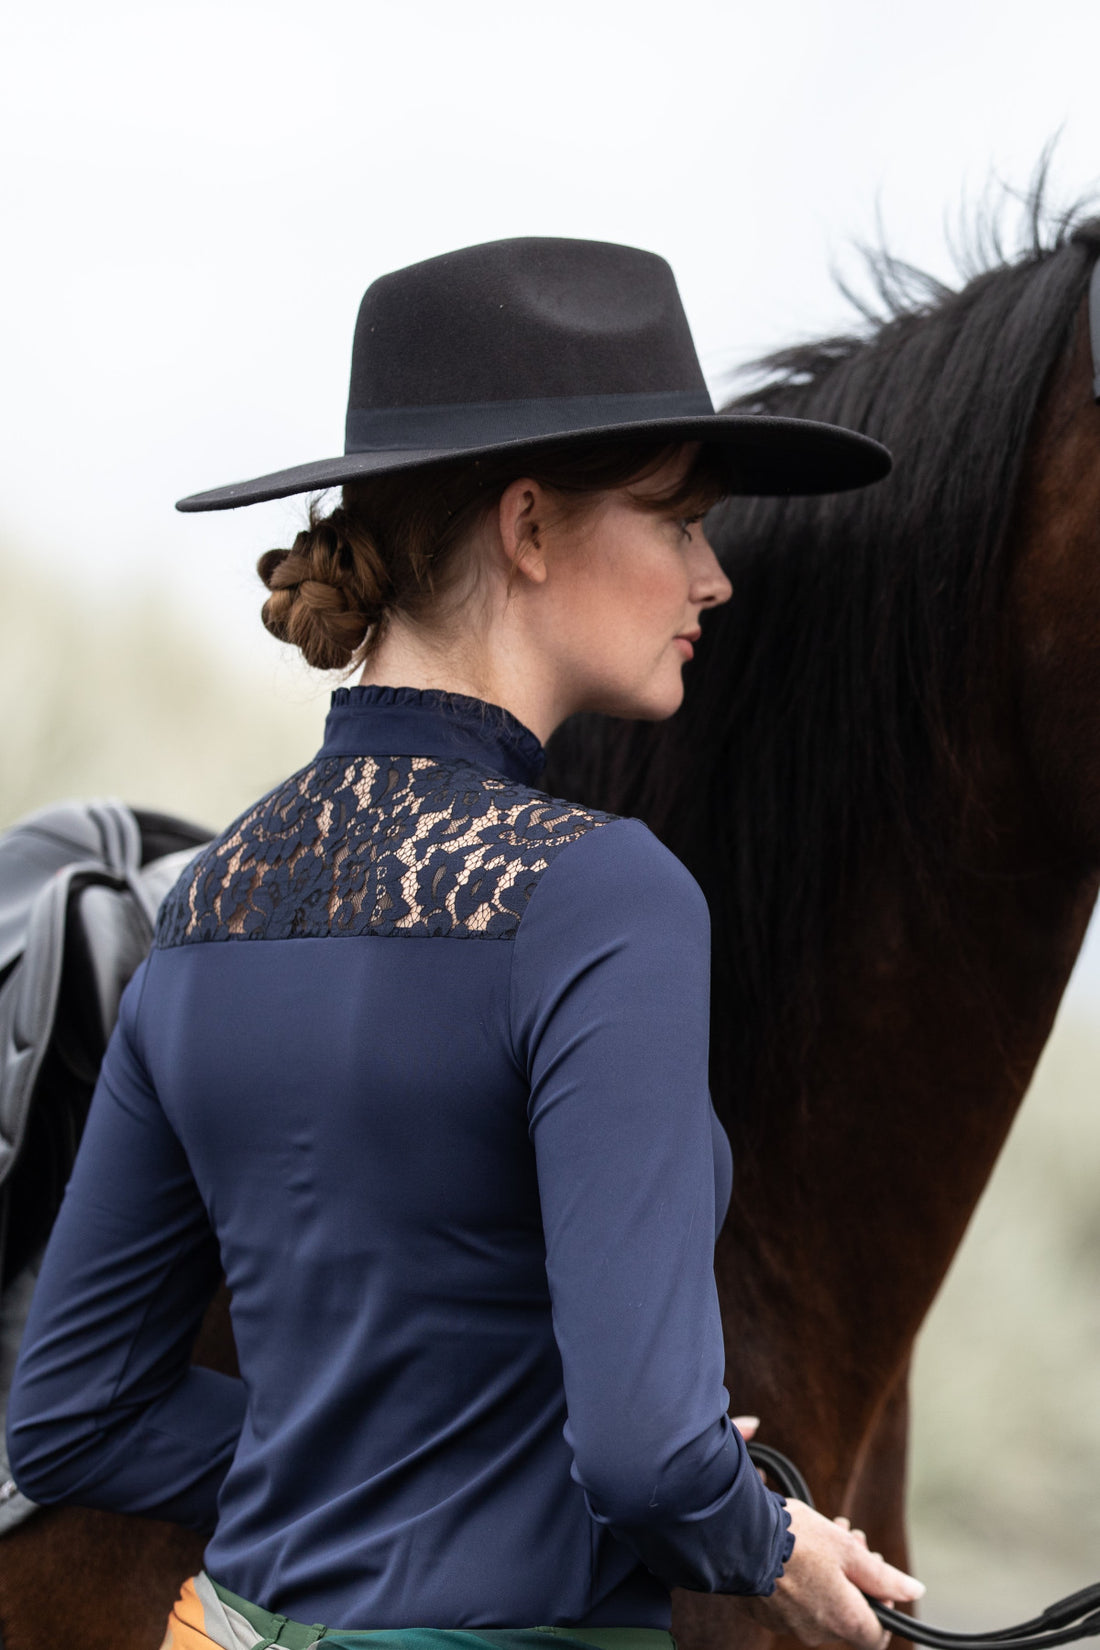 Womens Riding Wear and Country Clothing